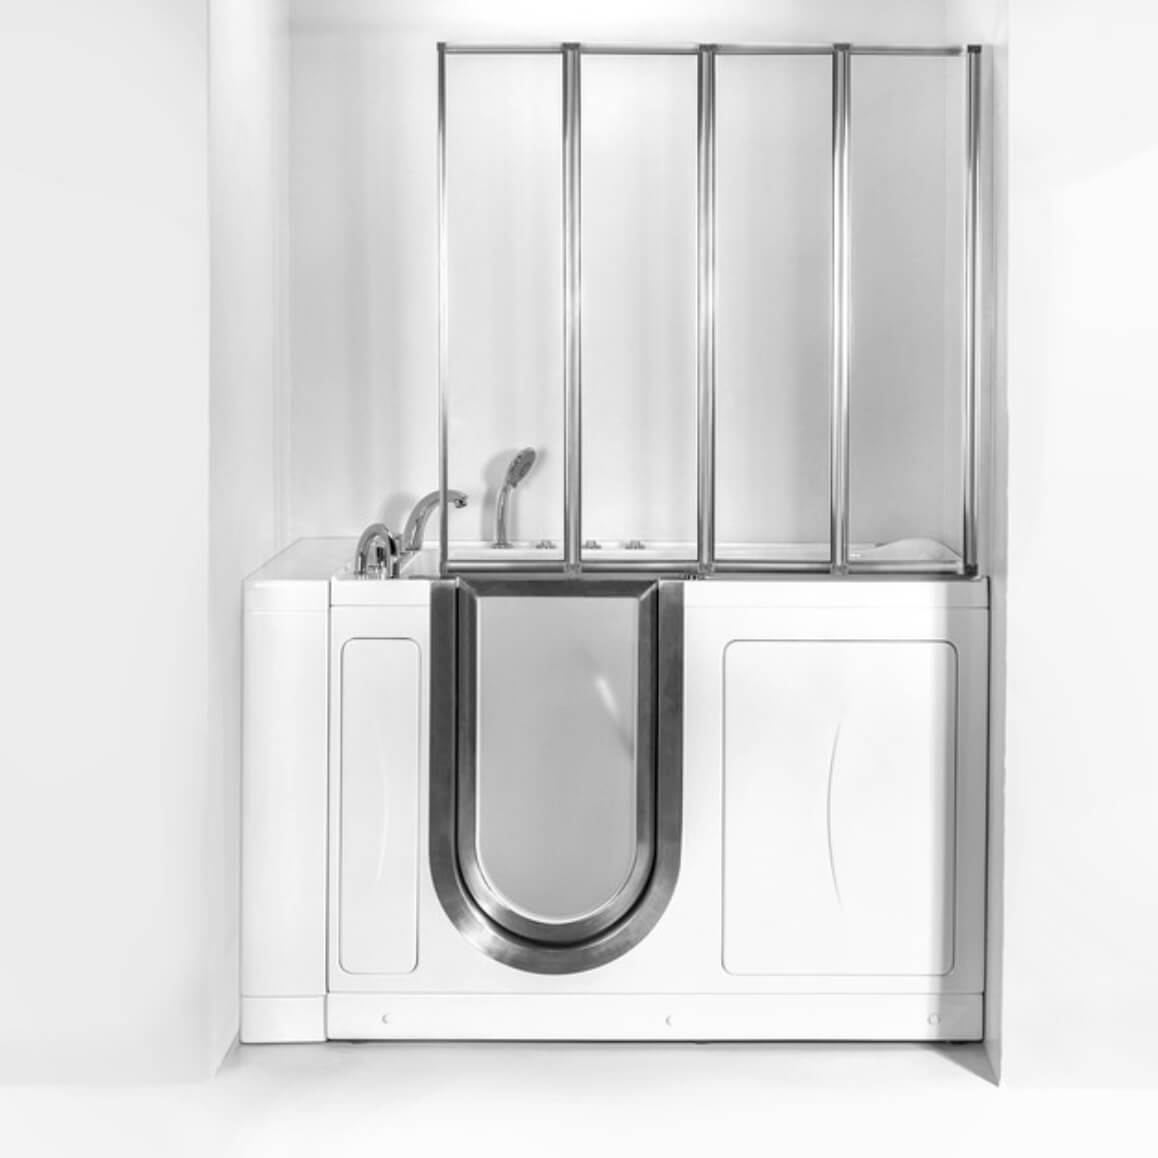 Ella's Bubbles Reviews: Standard Walk-in tub with shower